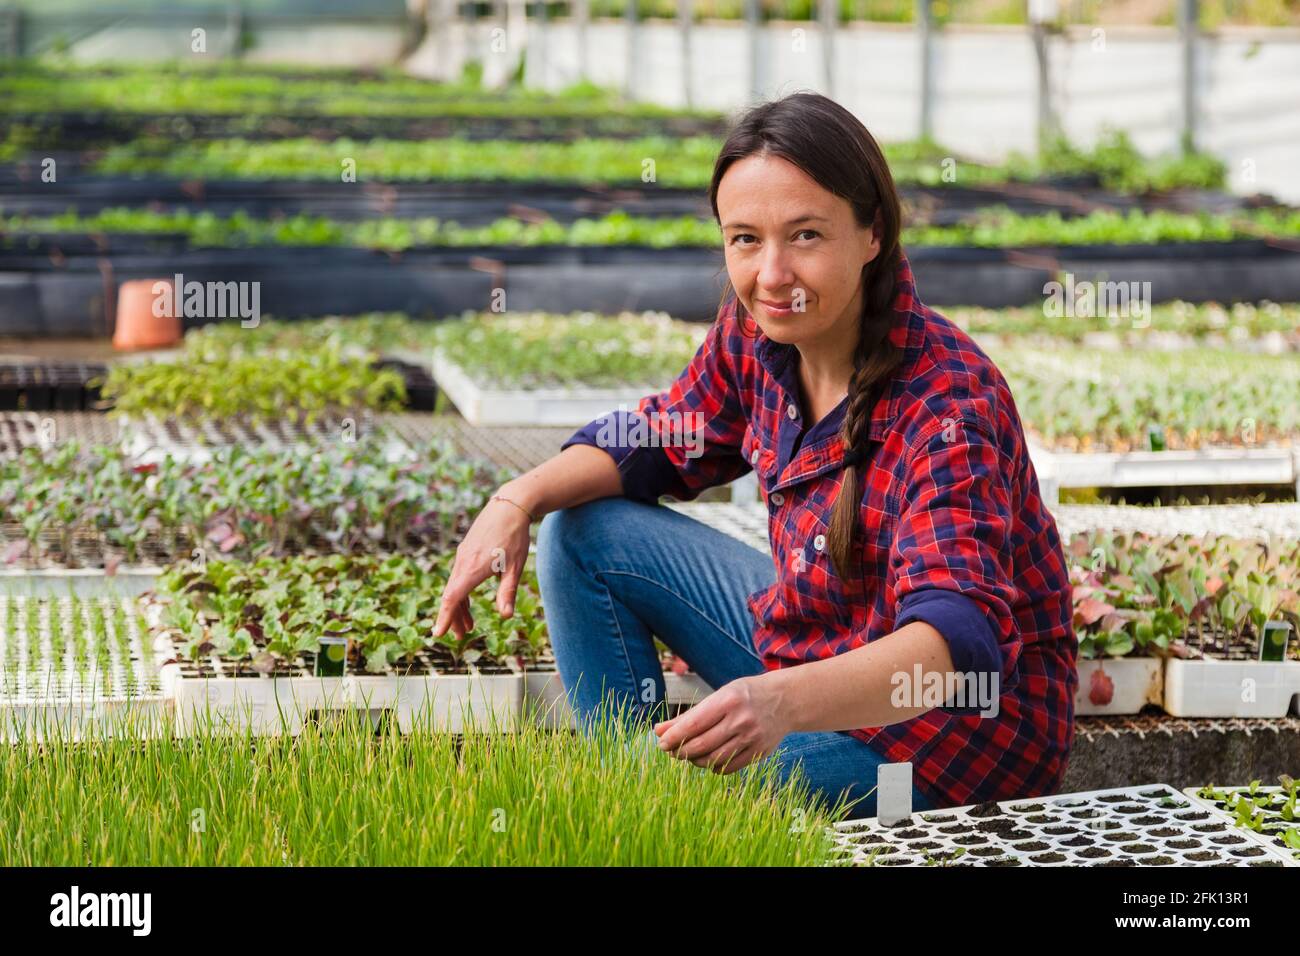 Candid portrait of happy woman working in a greenhouse. Concept: sustainable agriculture, natural food industries Stock Photo